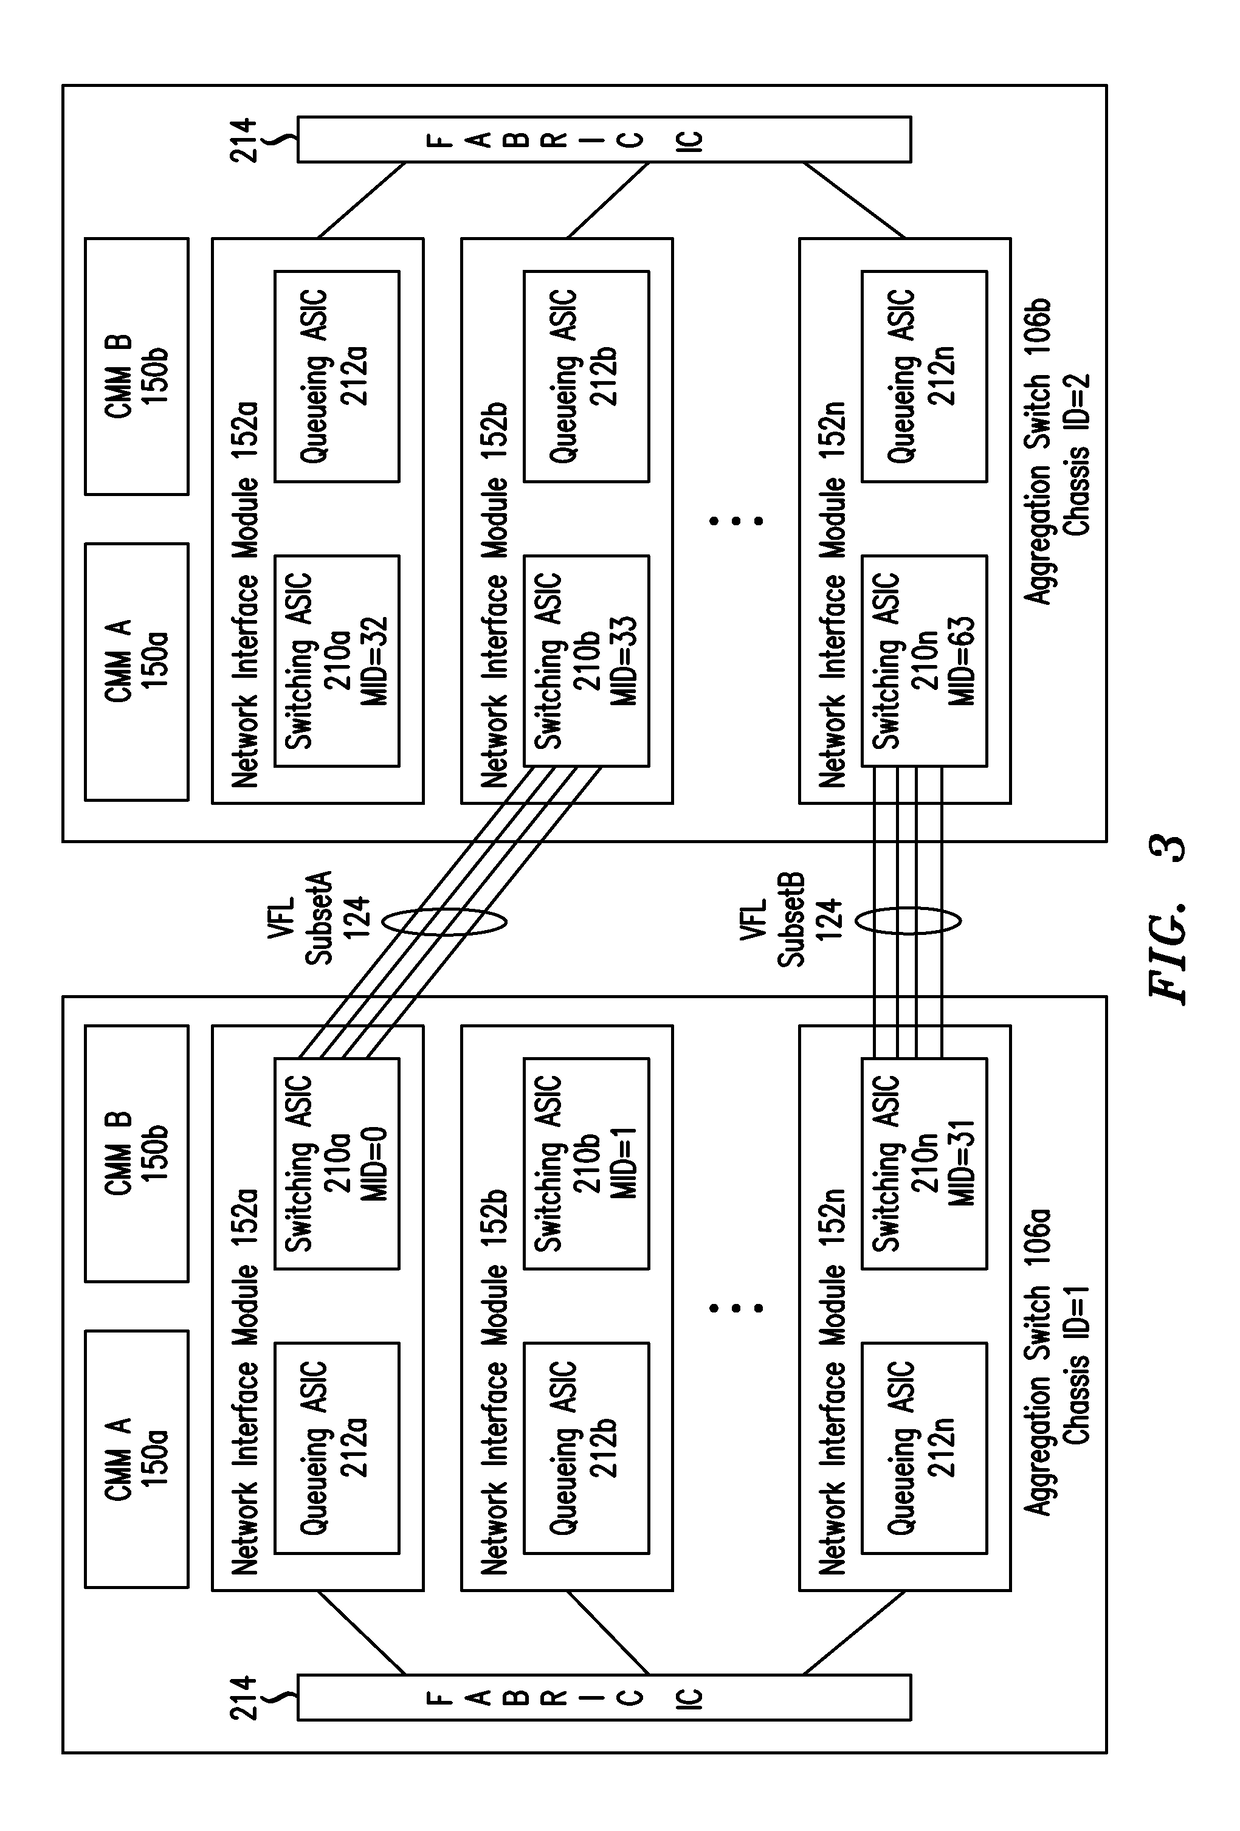 IP multicast snooping and routing with multi-chassis link aggregation